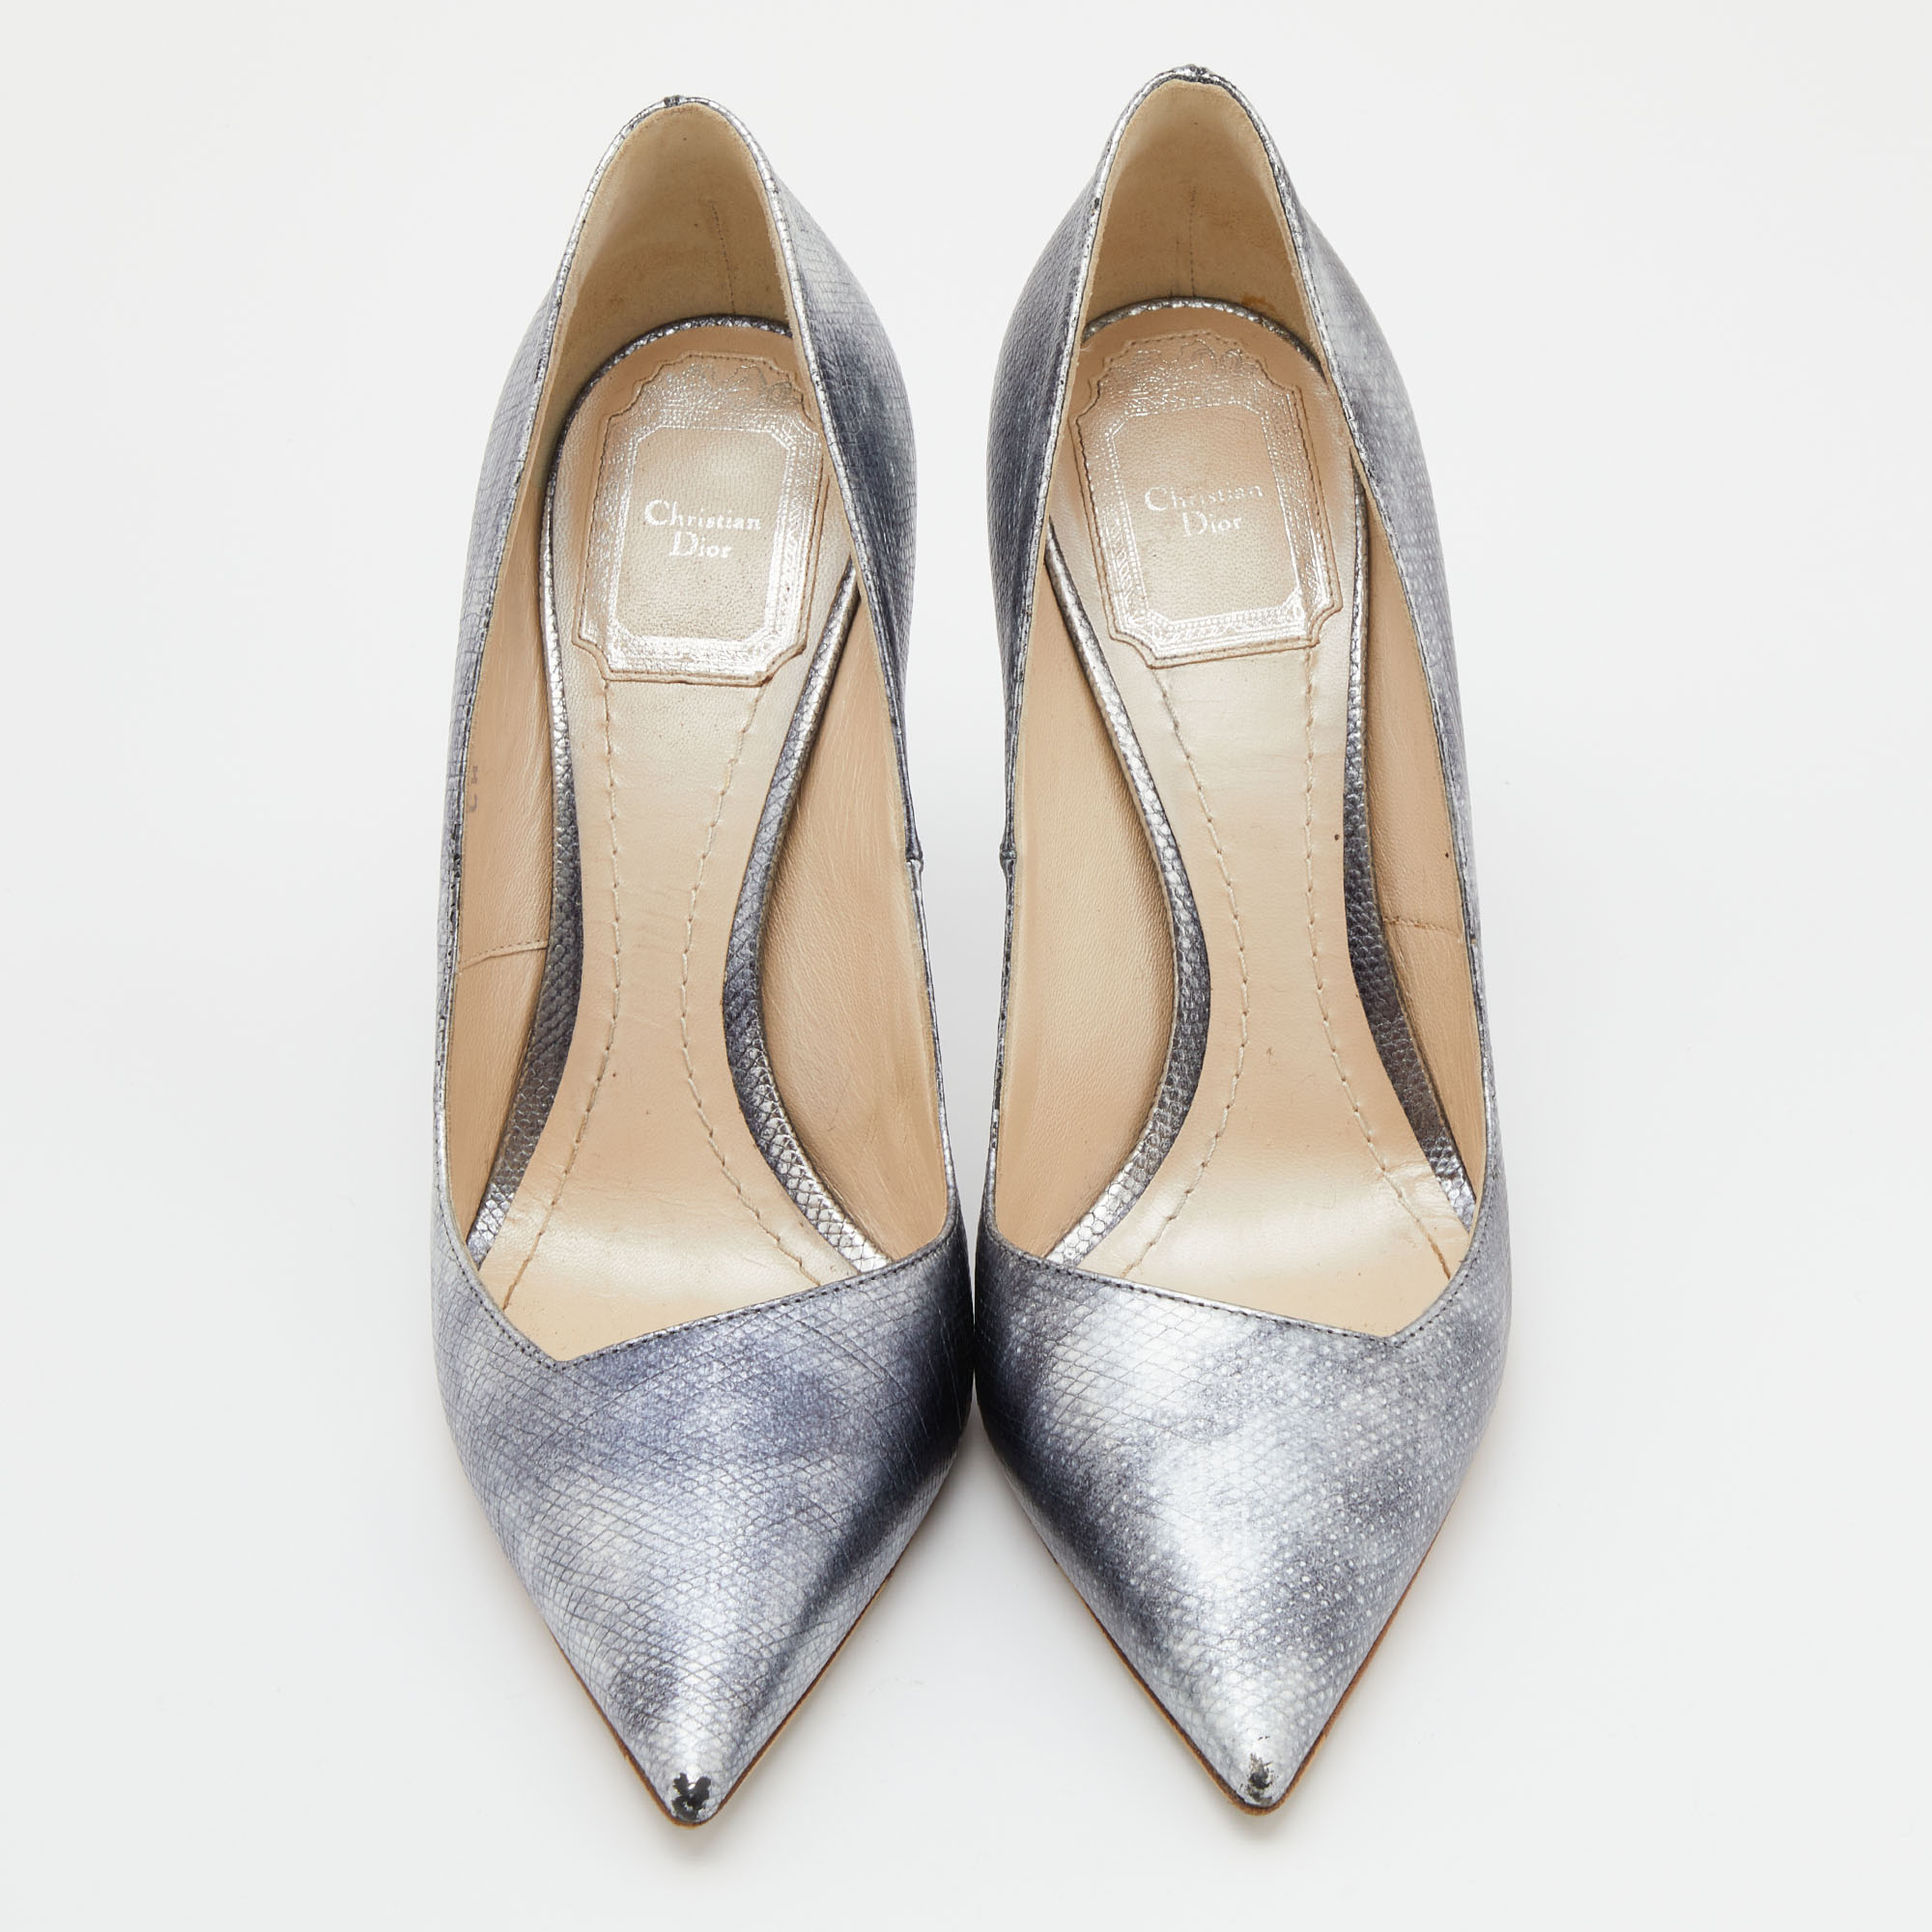 Dior Silver Python Effect Leather Songe Pumps Size 37